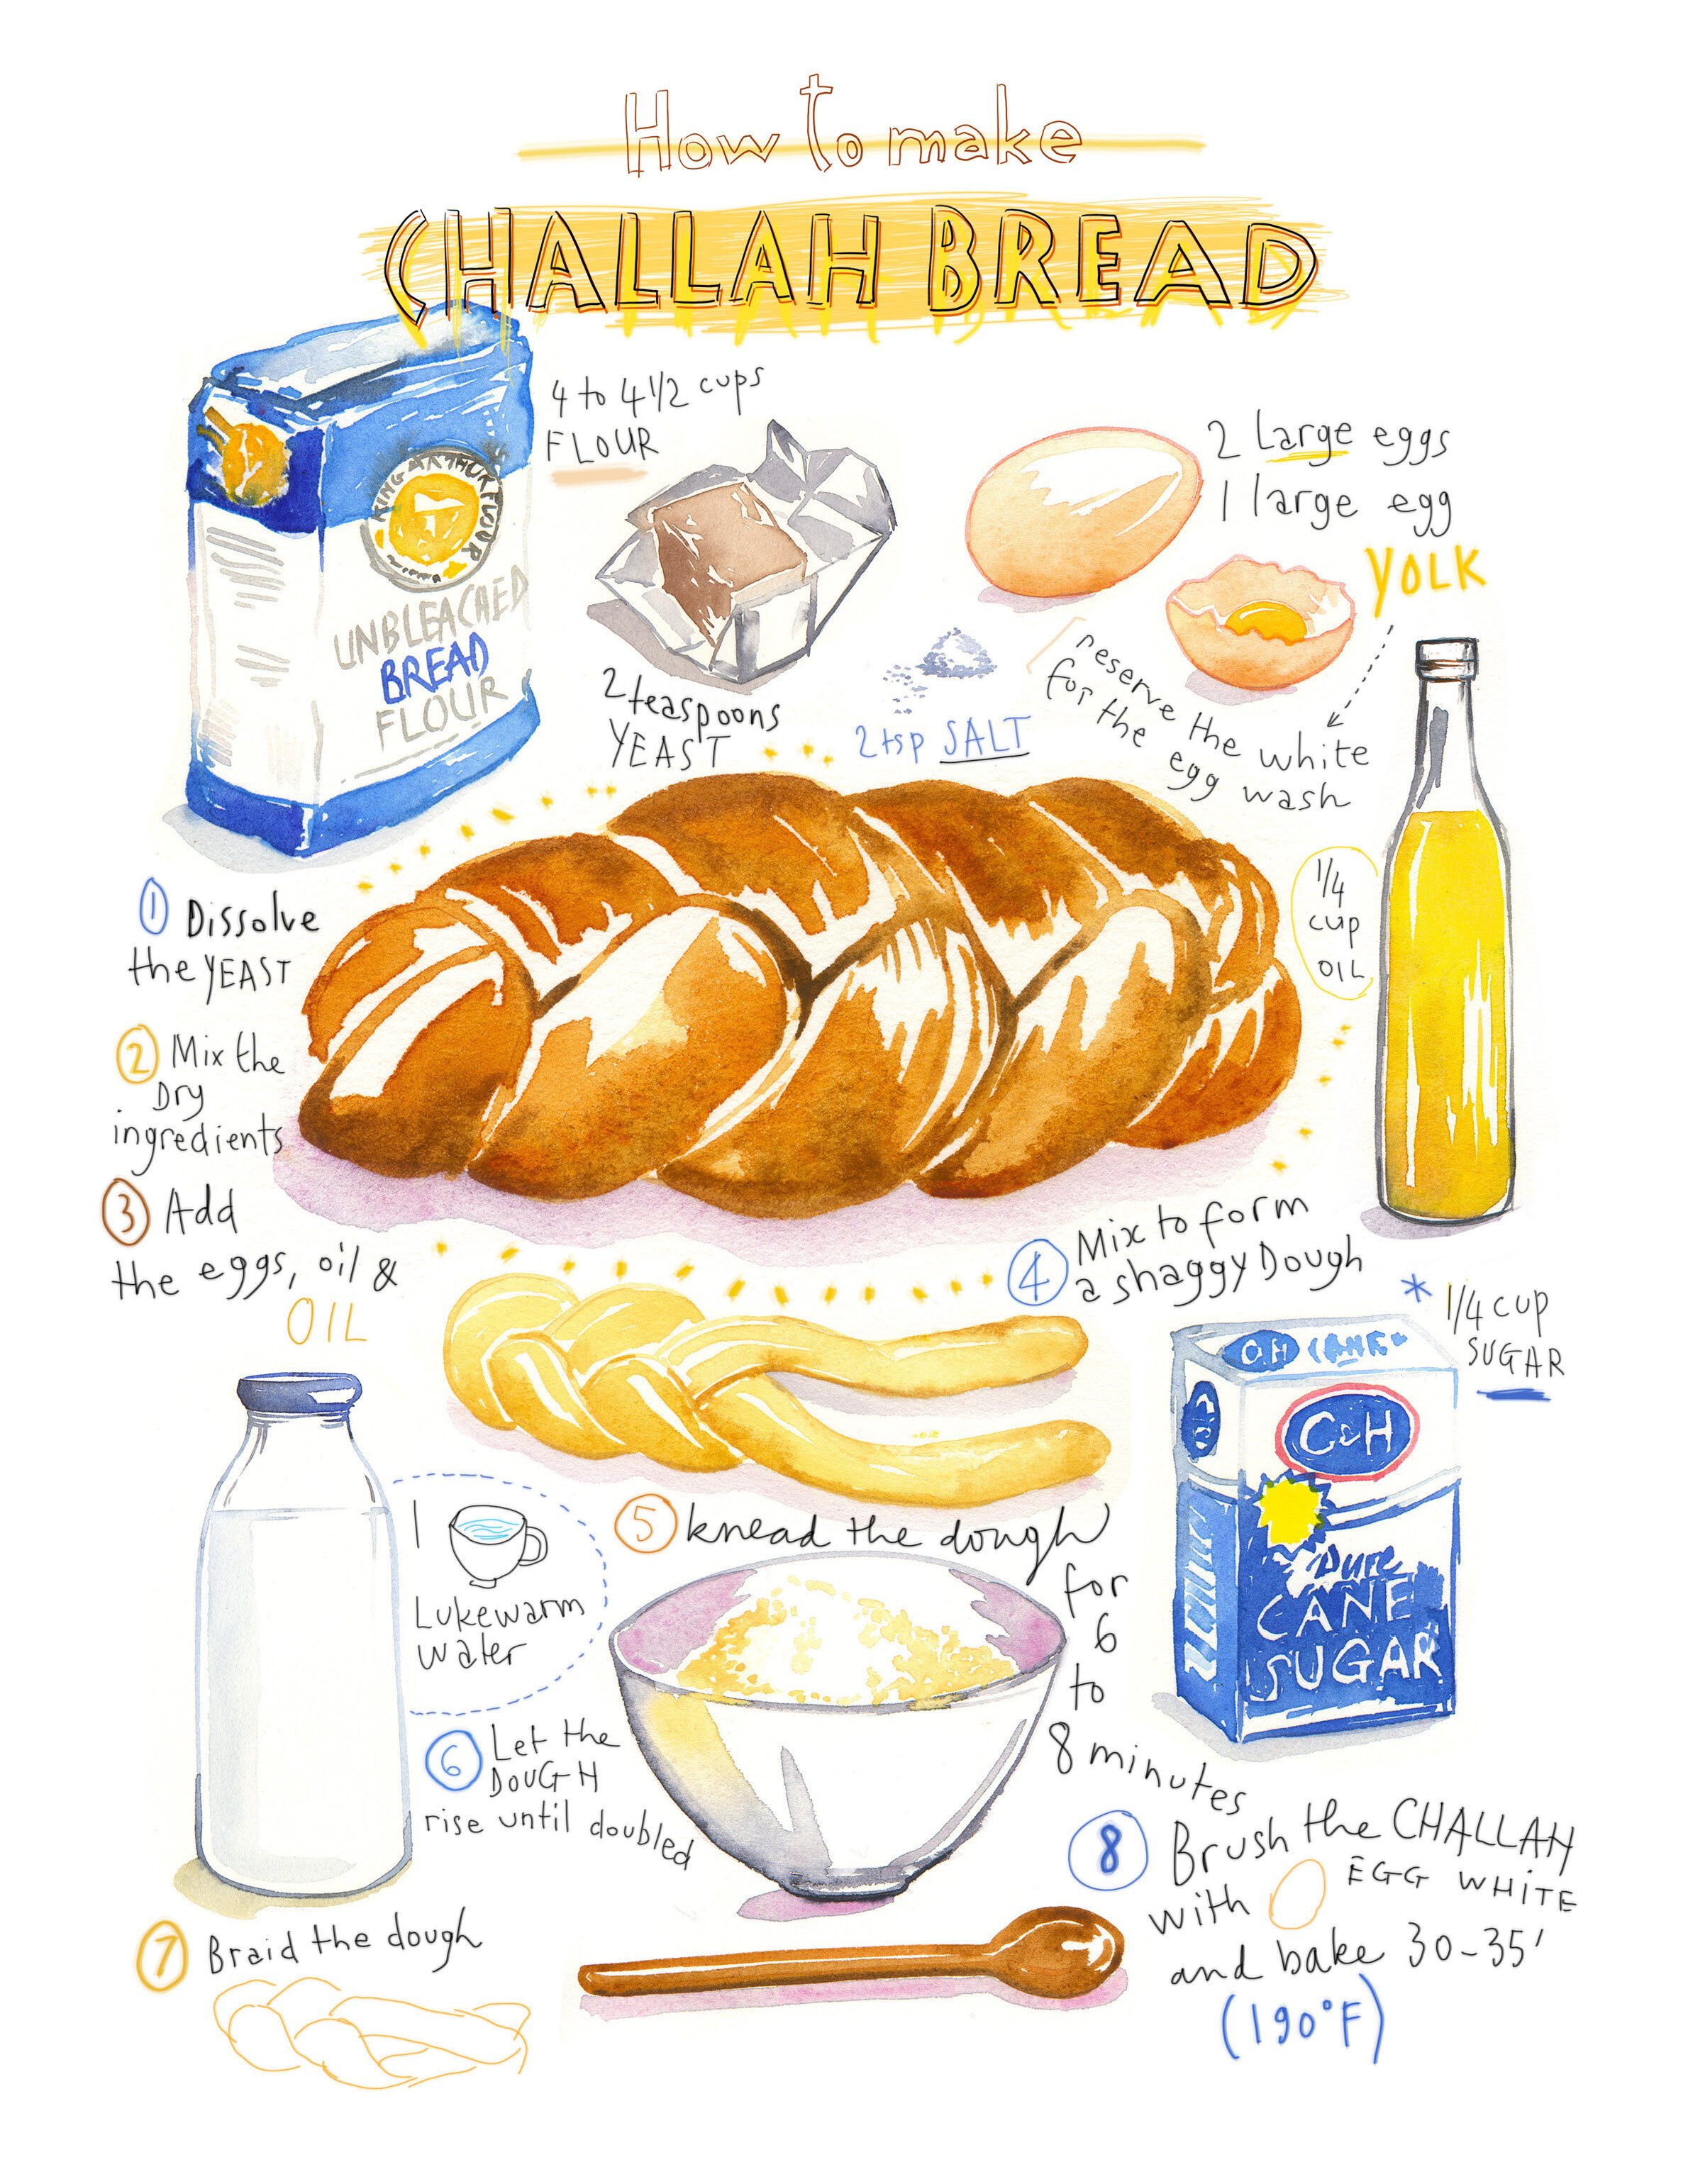 How-to: Challah Bread